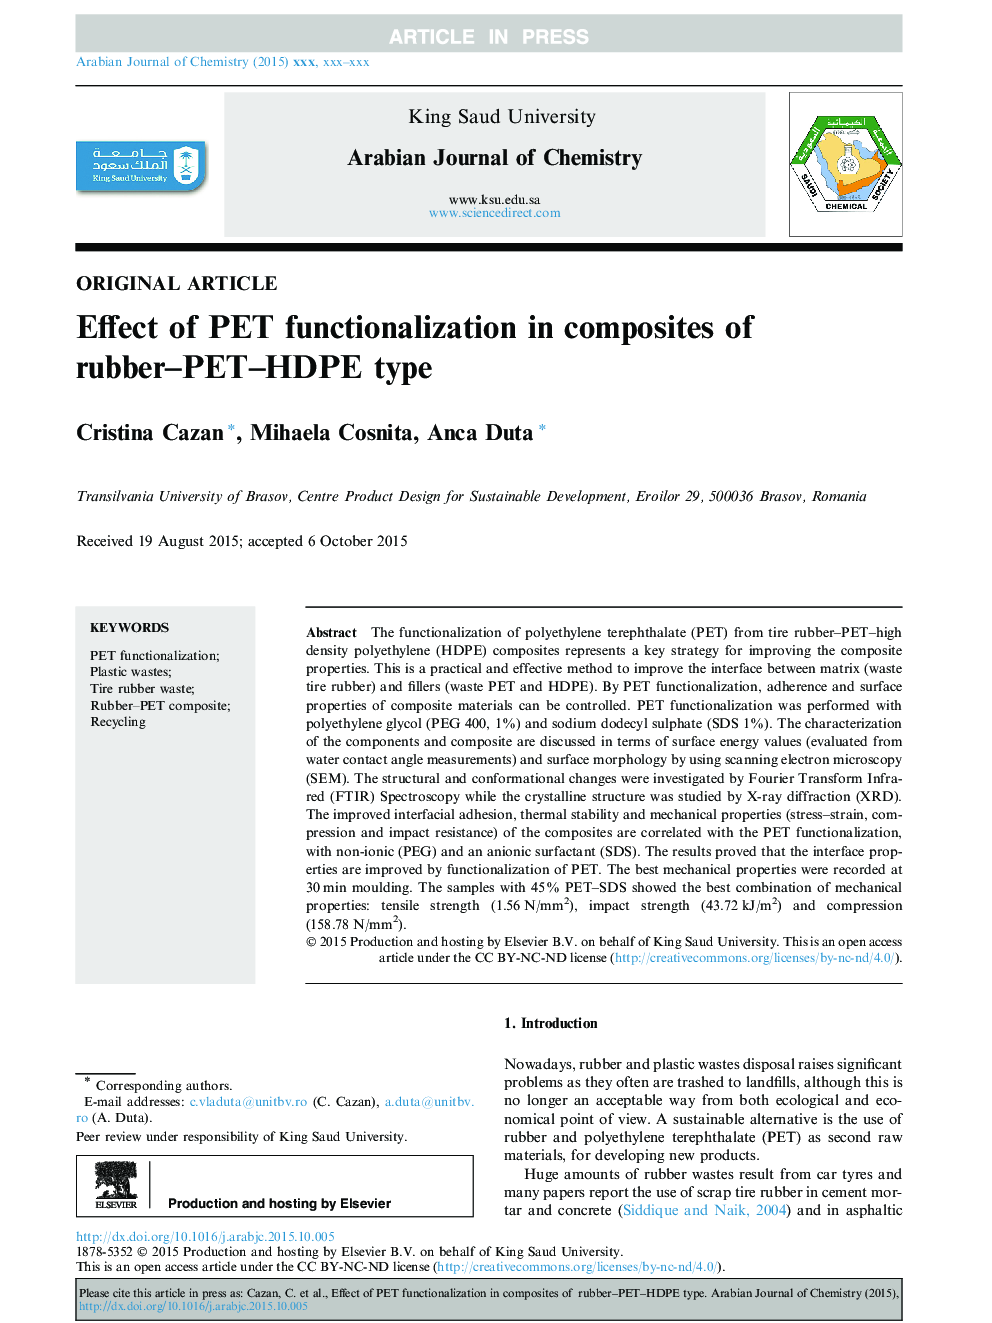 Effect of PET functionalization in composites of  rubber-PET-HDPE type